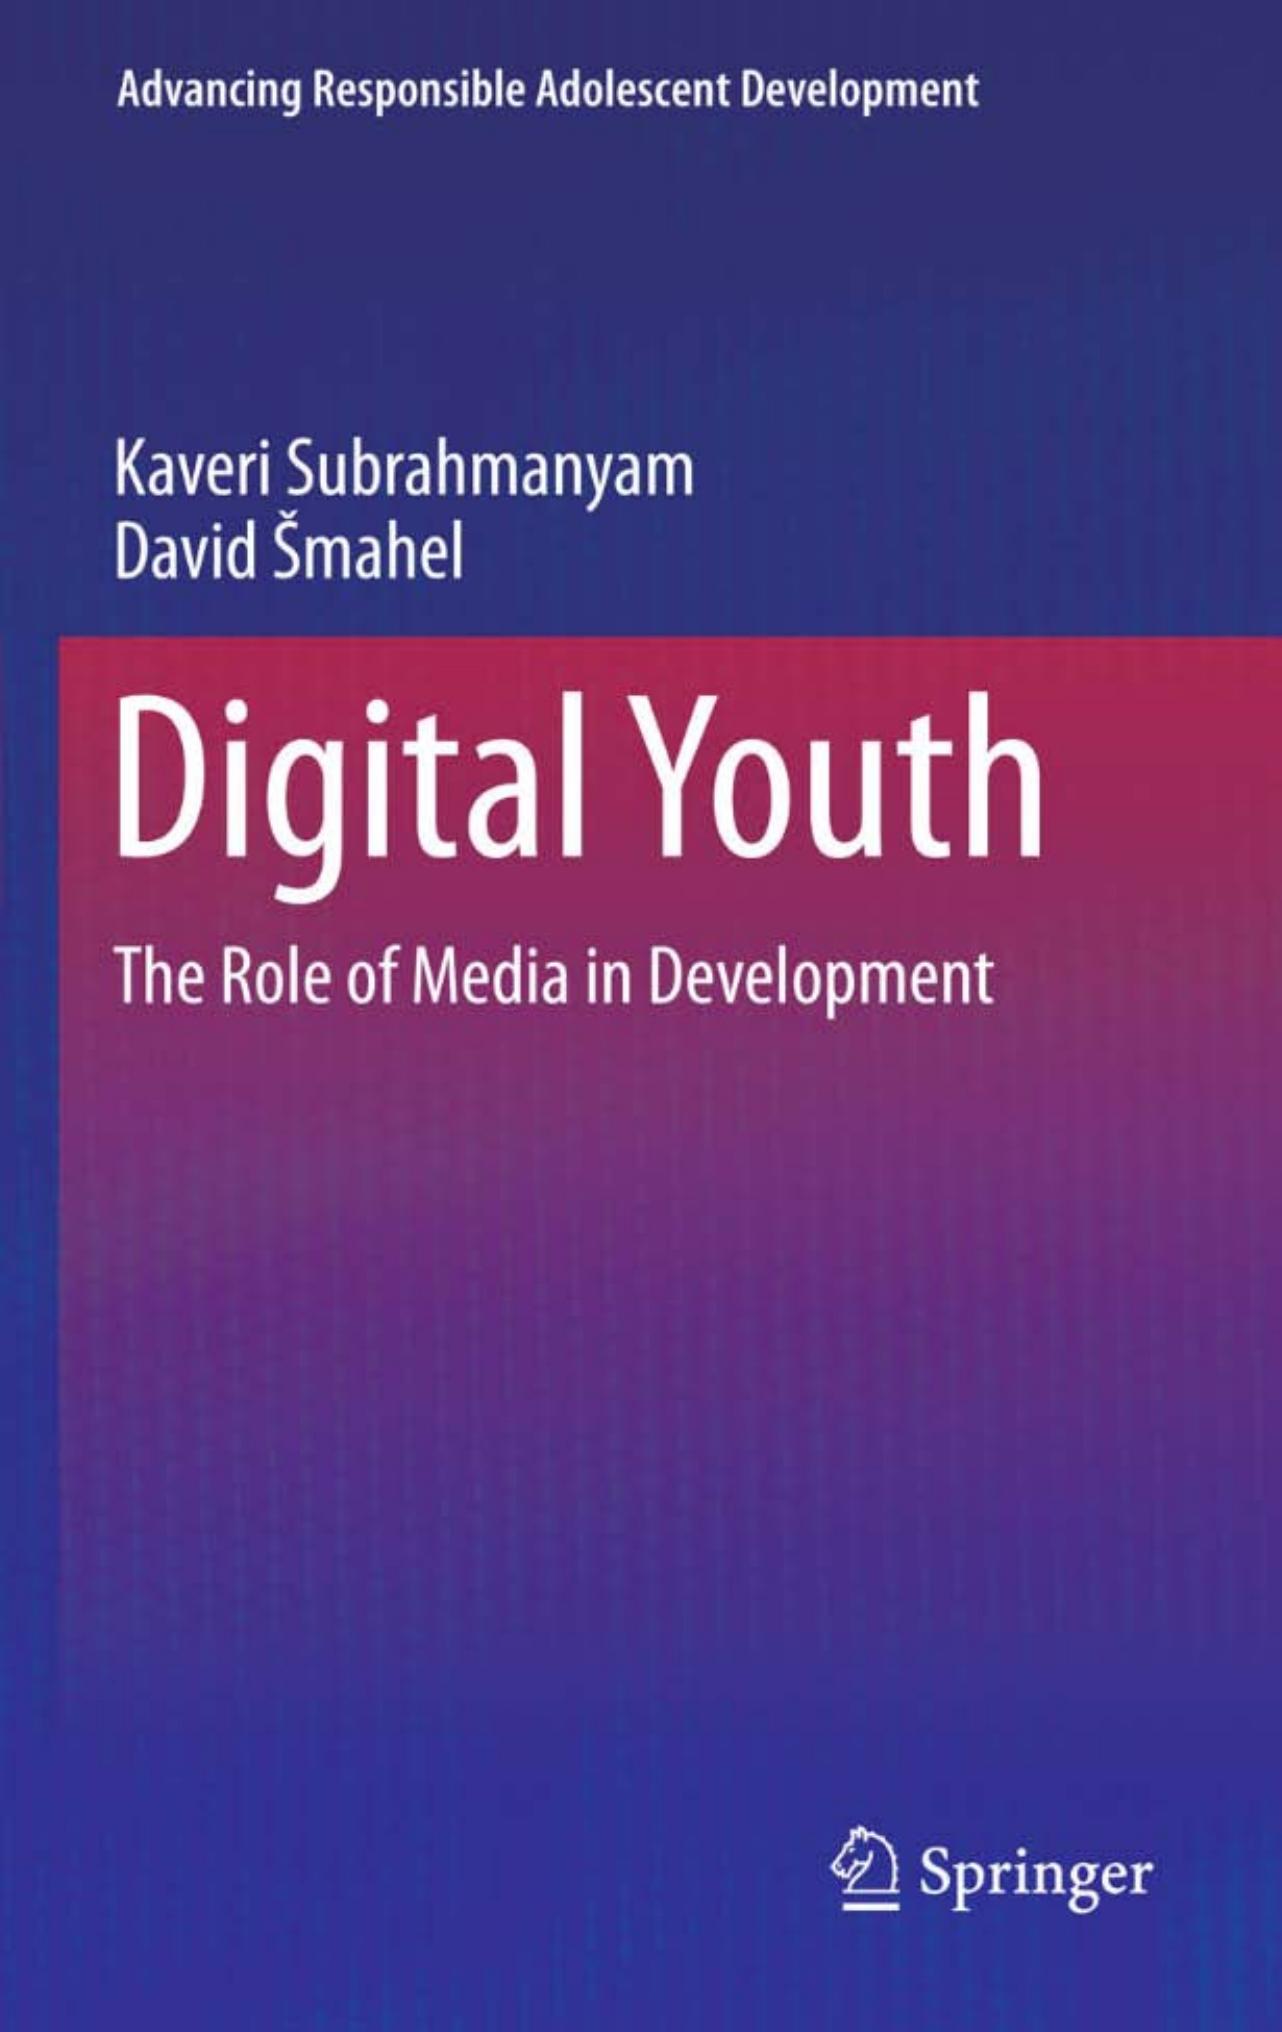 Digital Youth: The Role of Media in Development (Advancing Responsible Adolescent Development)